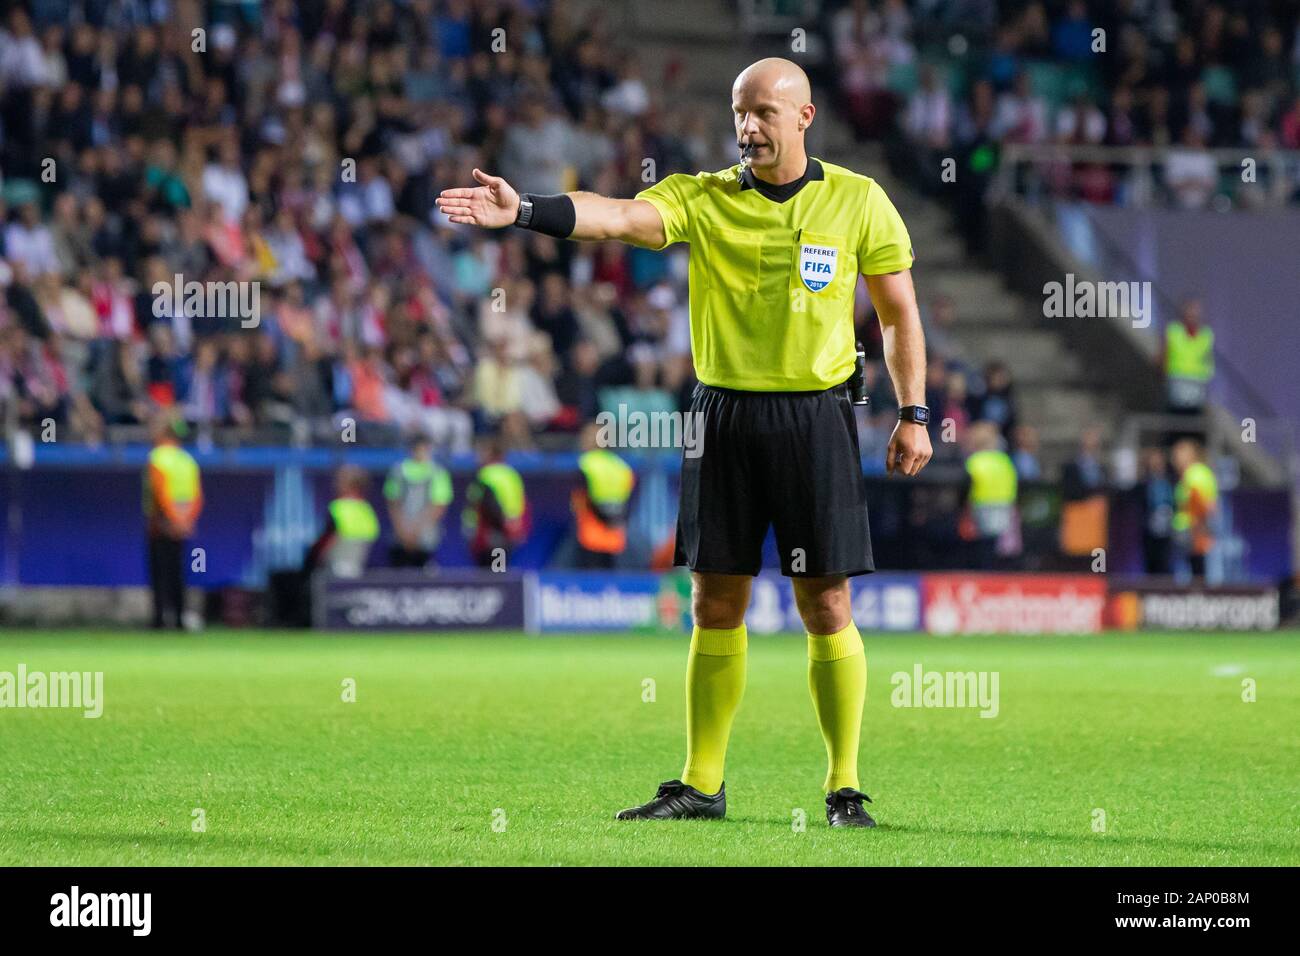 Referee Szymon Marciniak seen in action during the UEFA Super Cup 2018 between Real Madrid and Atletico Madrid at a le coq arena in Tallinn.(Final score; Real Madrid 2:4 Atletico Madrid) Stock Photo